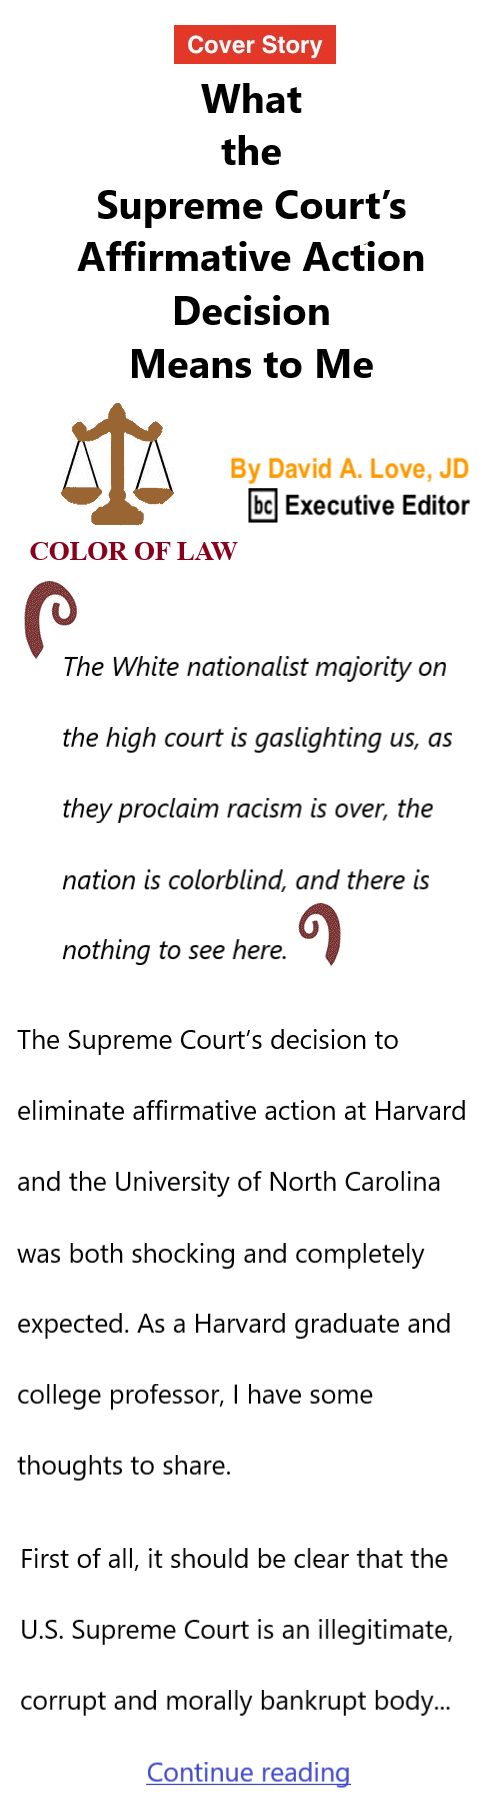 BlackCommentator.com July 6, 2023 - Issue 963: Cover Story - What the Supreme Court’s Affirmative Action Decision Means to Me - Color of Law By David A. Love, JD, BC Executive Editor